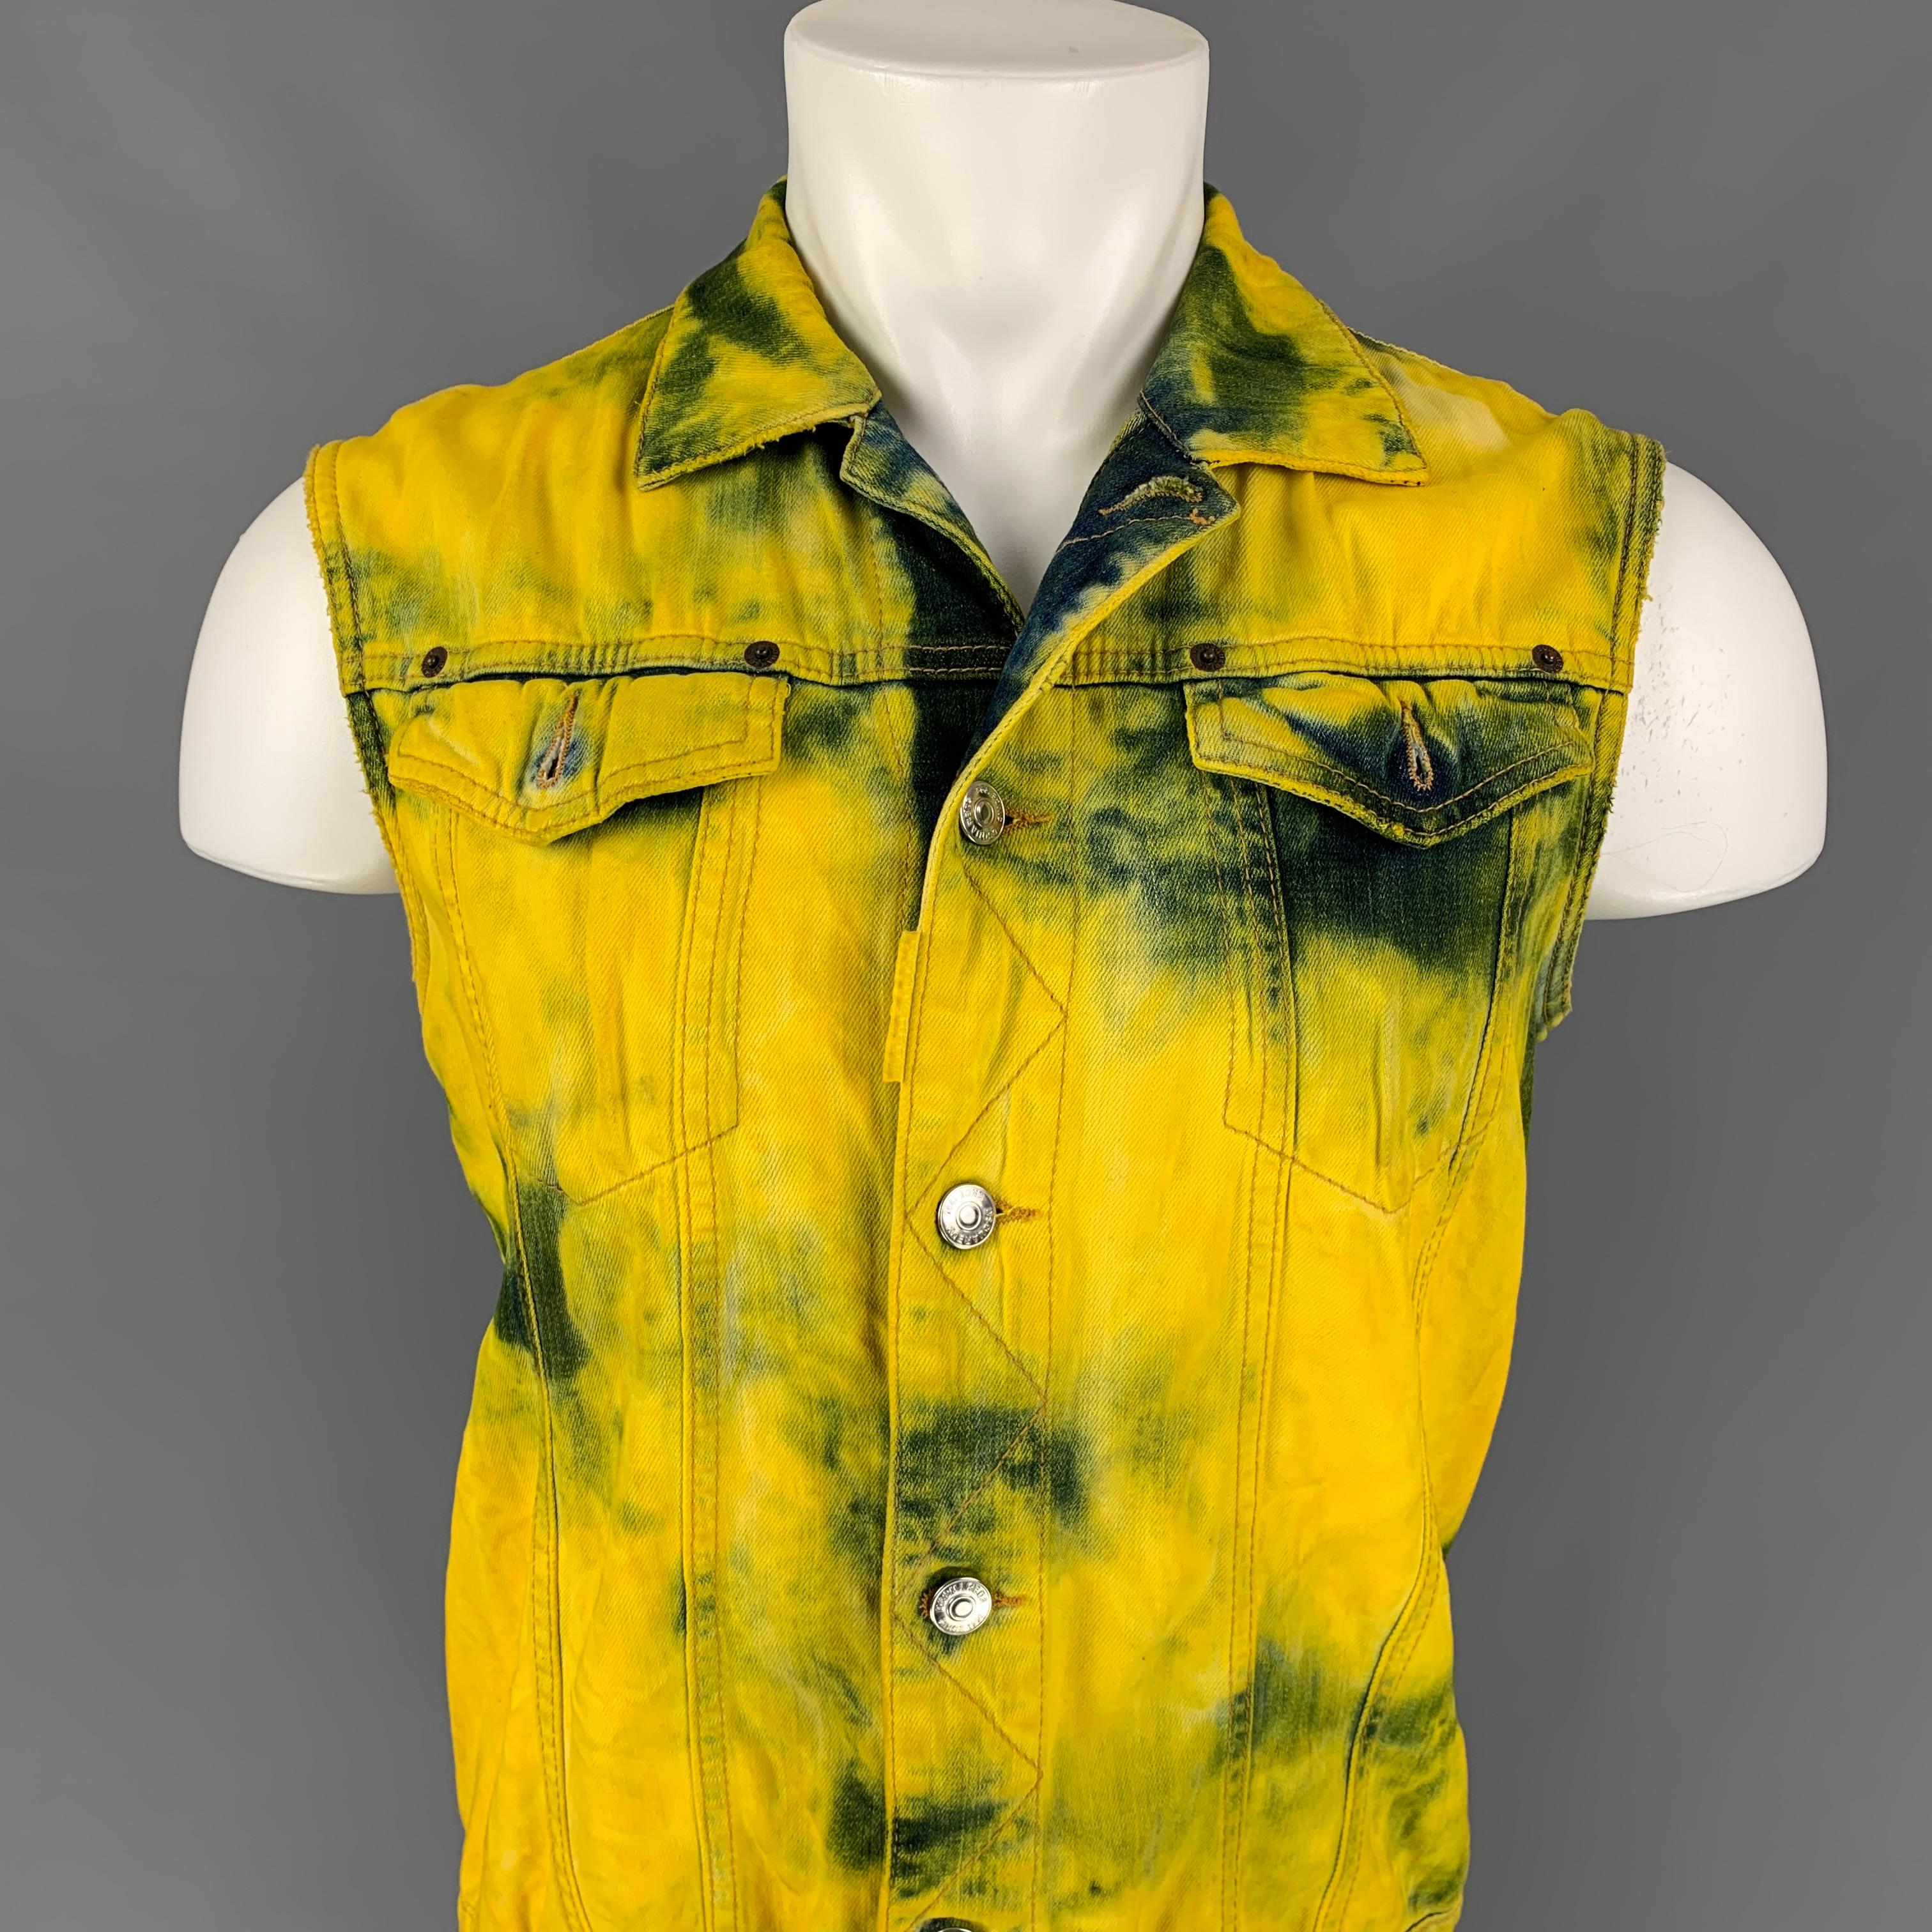 DSQUARED2 vest comes in a yellow bleached denim featuring a trucker style, contrast stitching, front pockets, and a buttoned closure. Made in Italy. 

Very Good Pre-Owned Condition.
Marked: 48

Measurements:

Shoulder: 16.5 in.
Chest: 40 in.
Length: